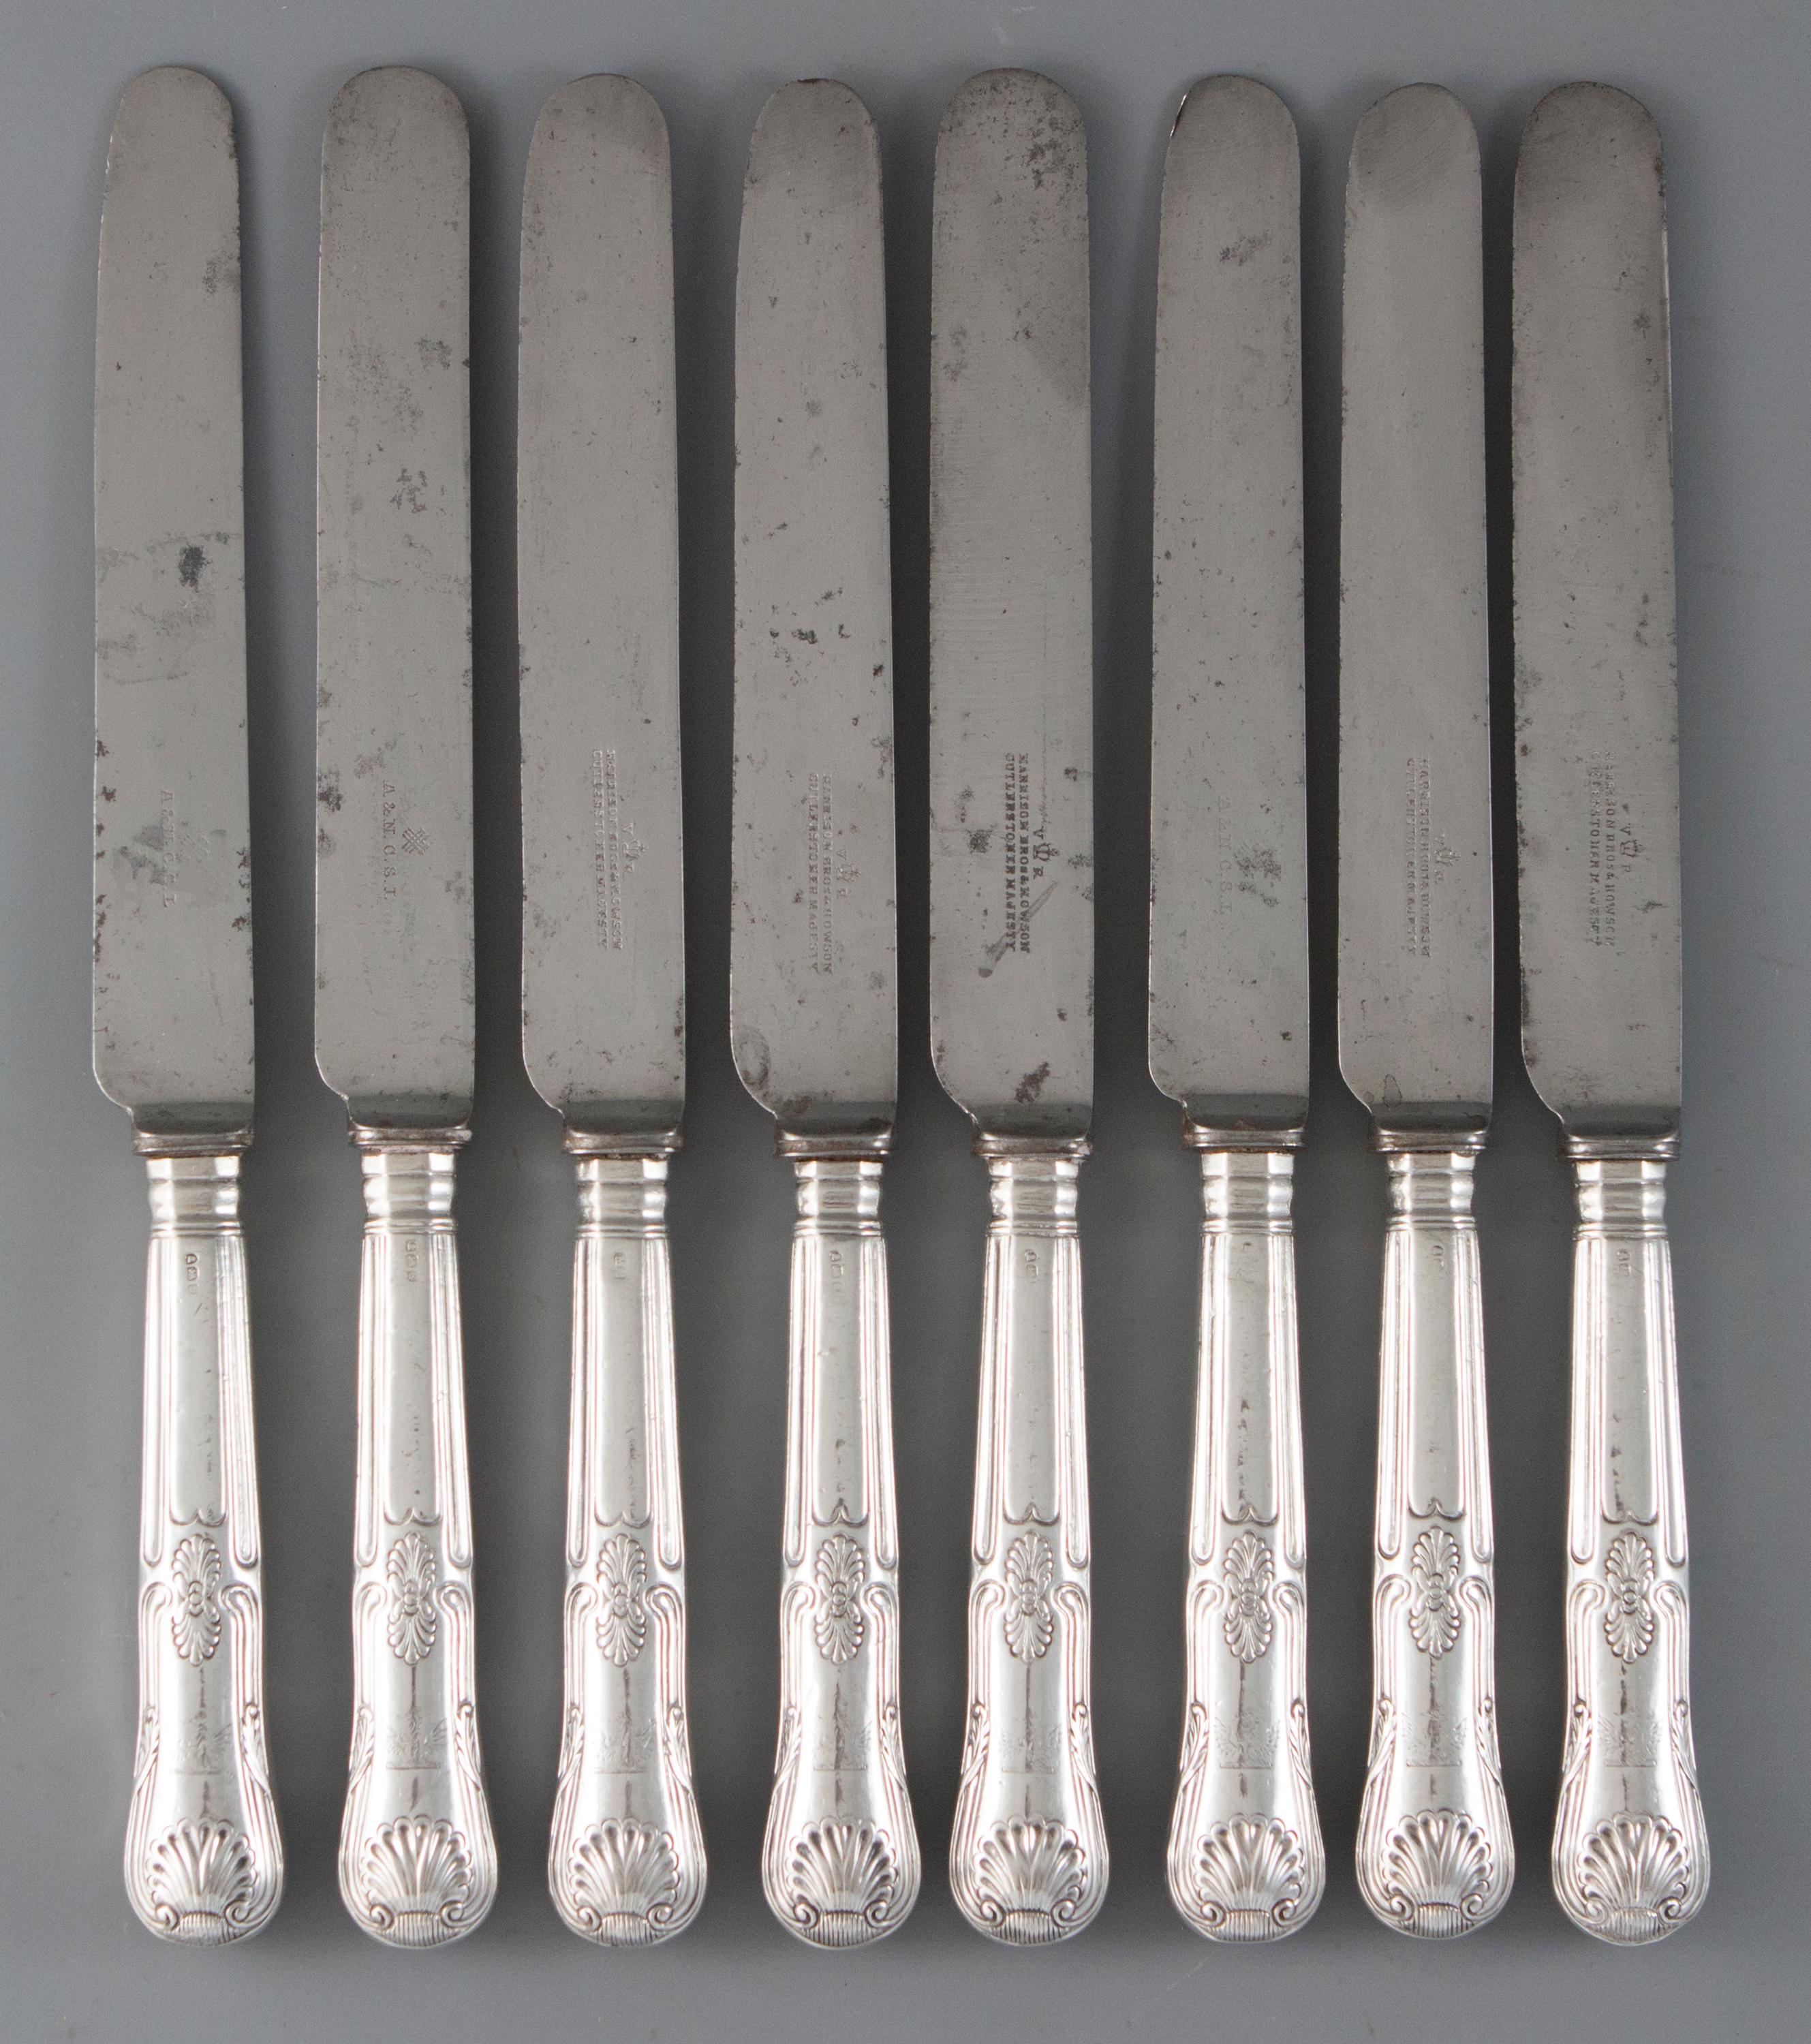 A set of 8 George III Kings pattern table knives, London 1813 by Moses Brent

A set of 8 George III Kings pattern table knives, with the original blades and engraved to the handle with a crest of a dragon.

The handles are hallmarked for London 1813